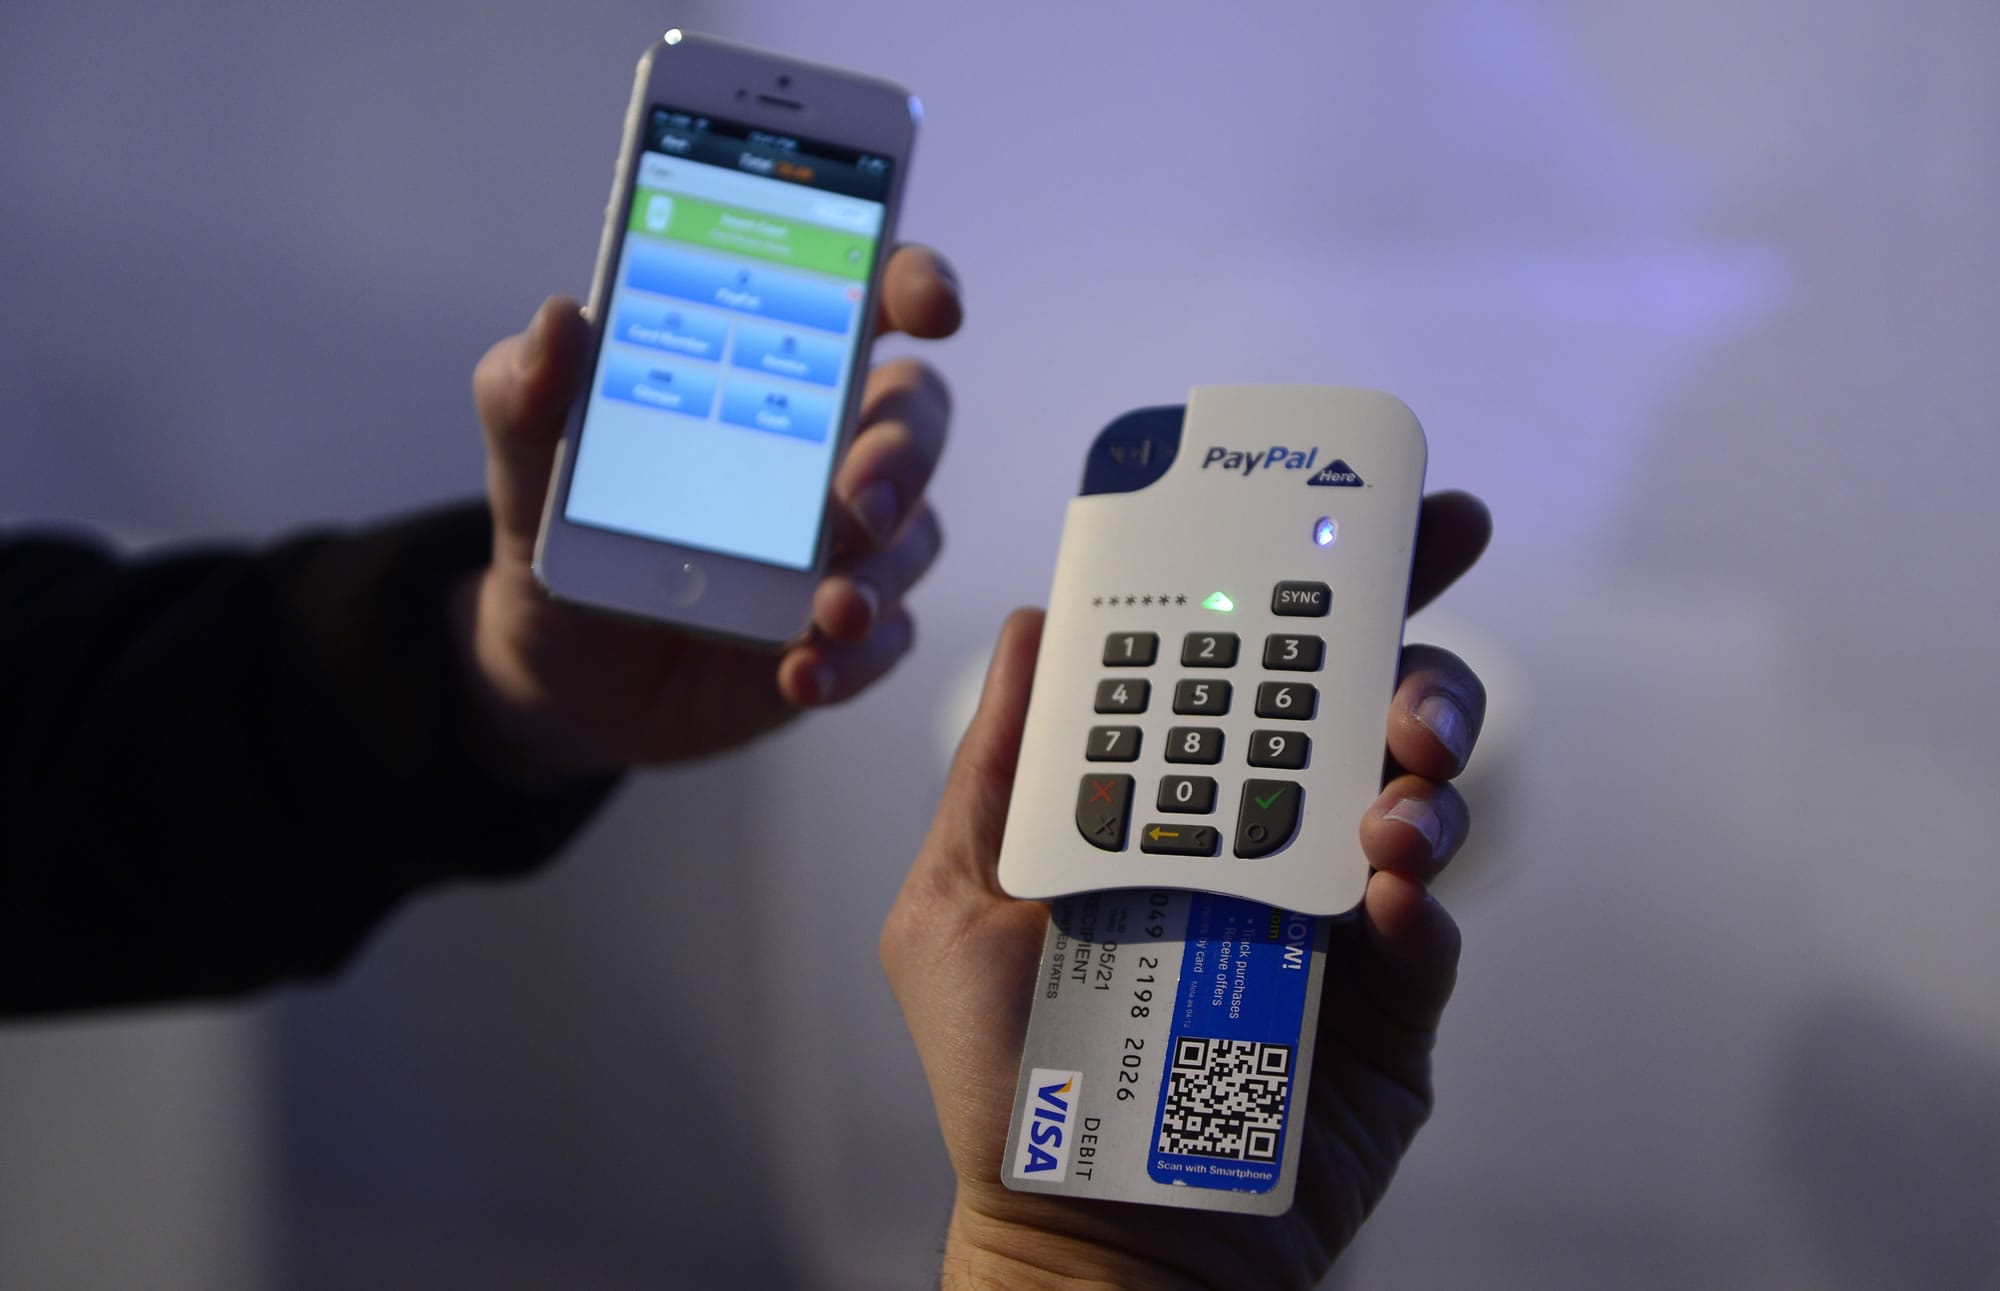 A man uses the &quot;Paypal here&quot; system of payment with a phone Wednesday at the Mobile World Congress in Barcelona, Spain.